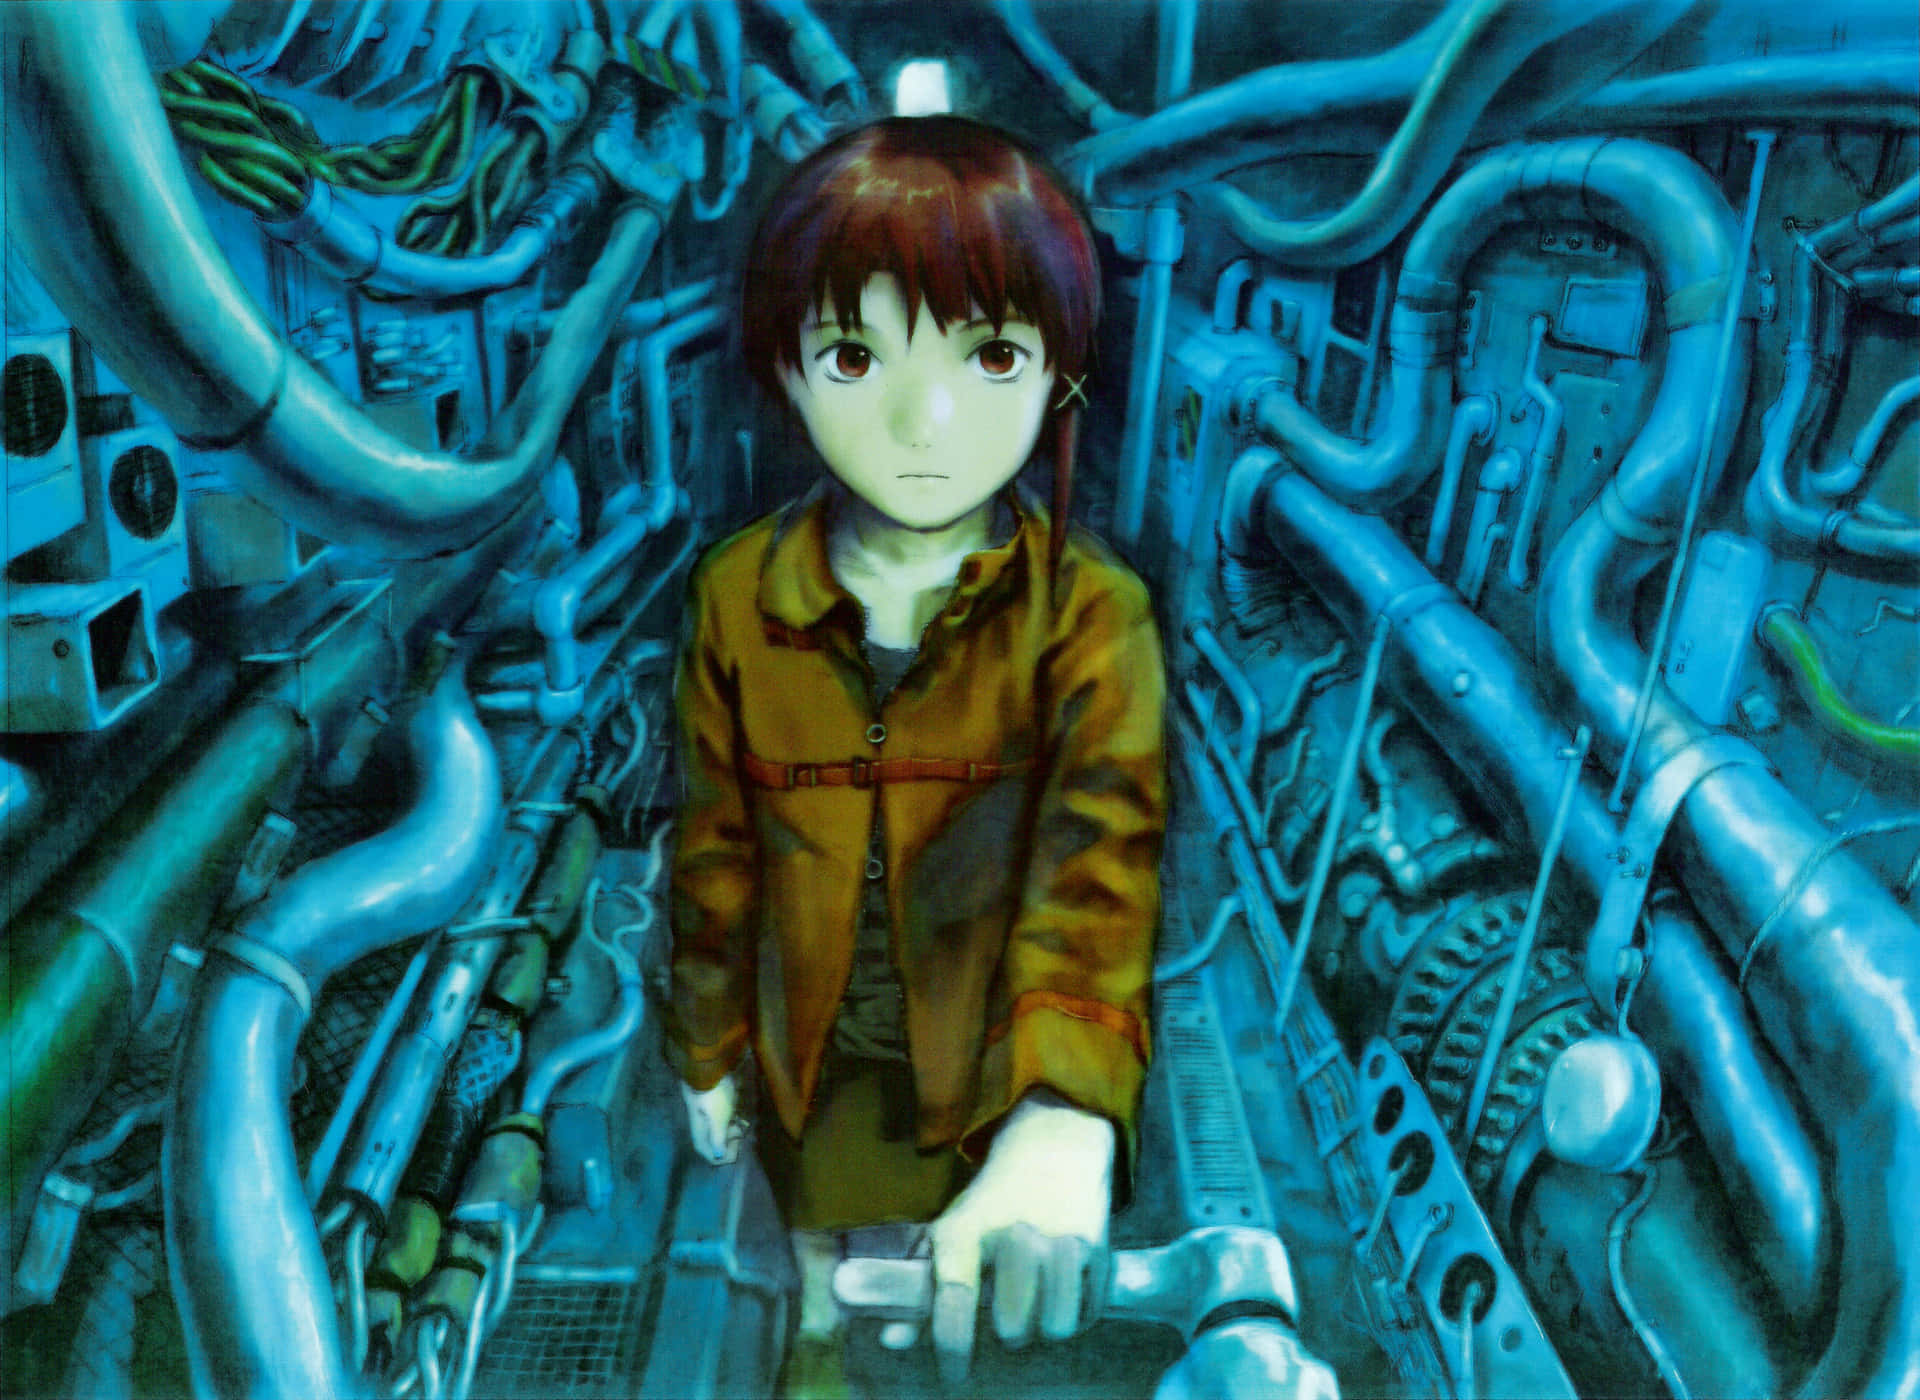 Serial Experiments Lain Continues To Captivate The Minds Of Anime Fans Around The World. Background